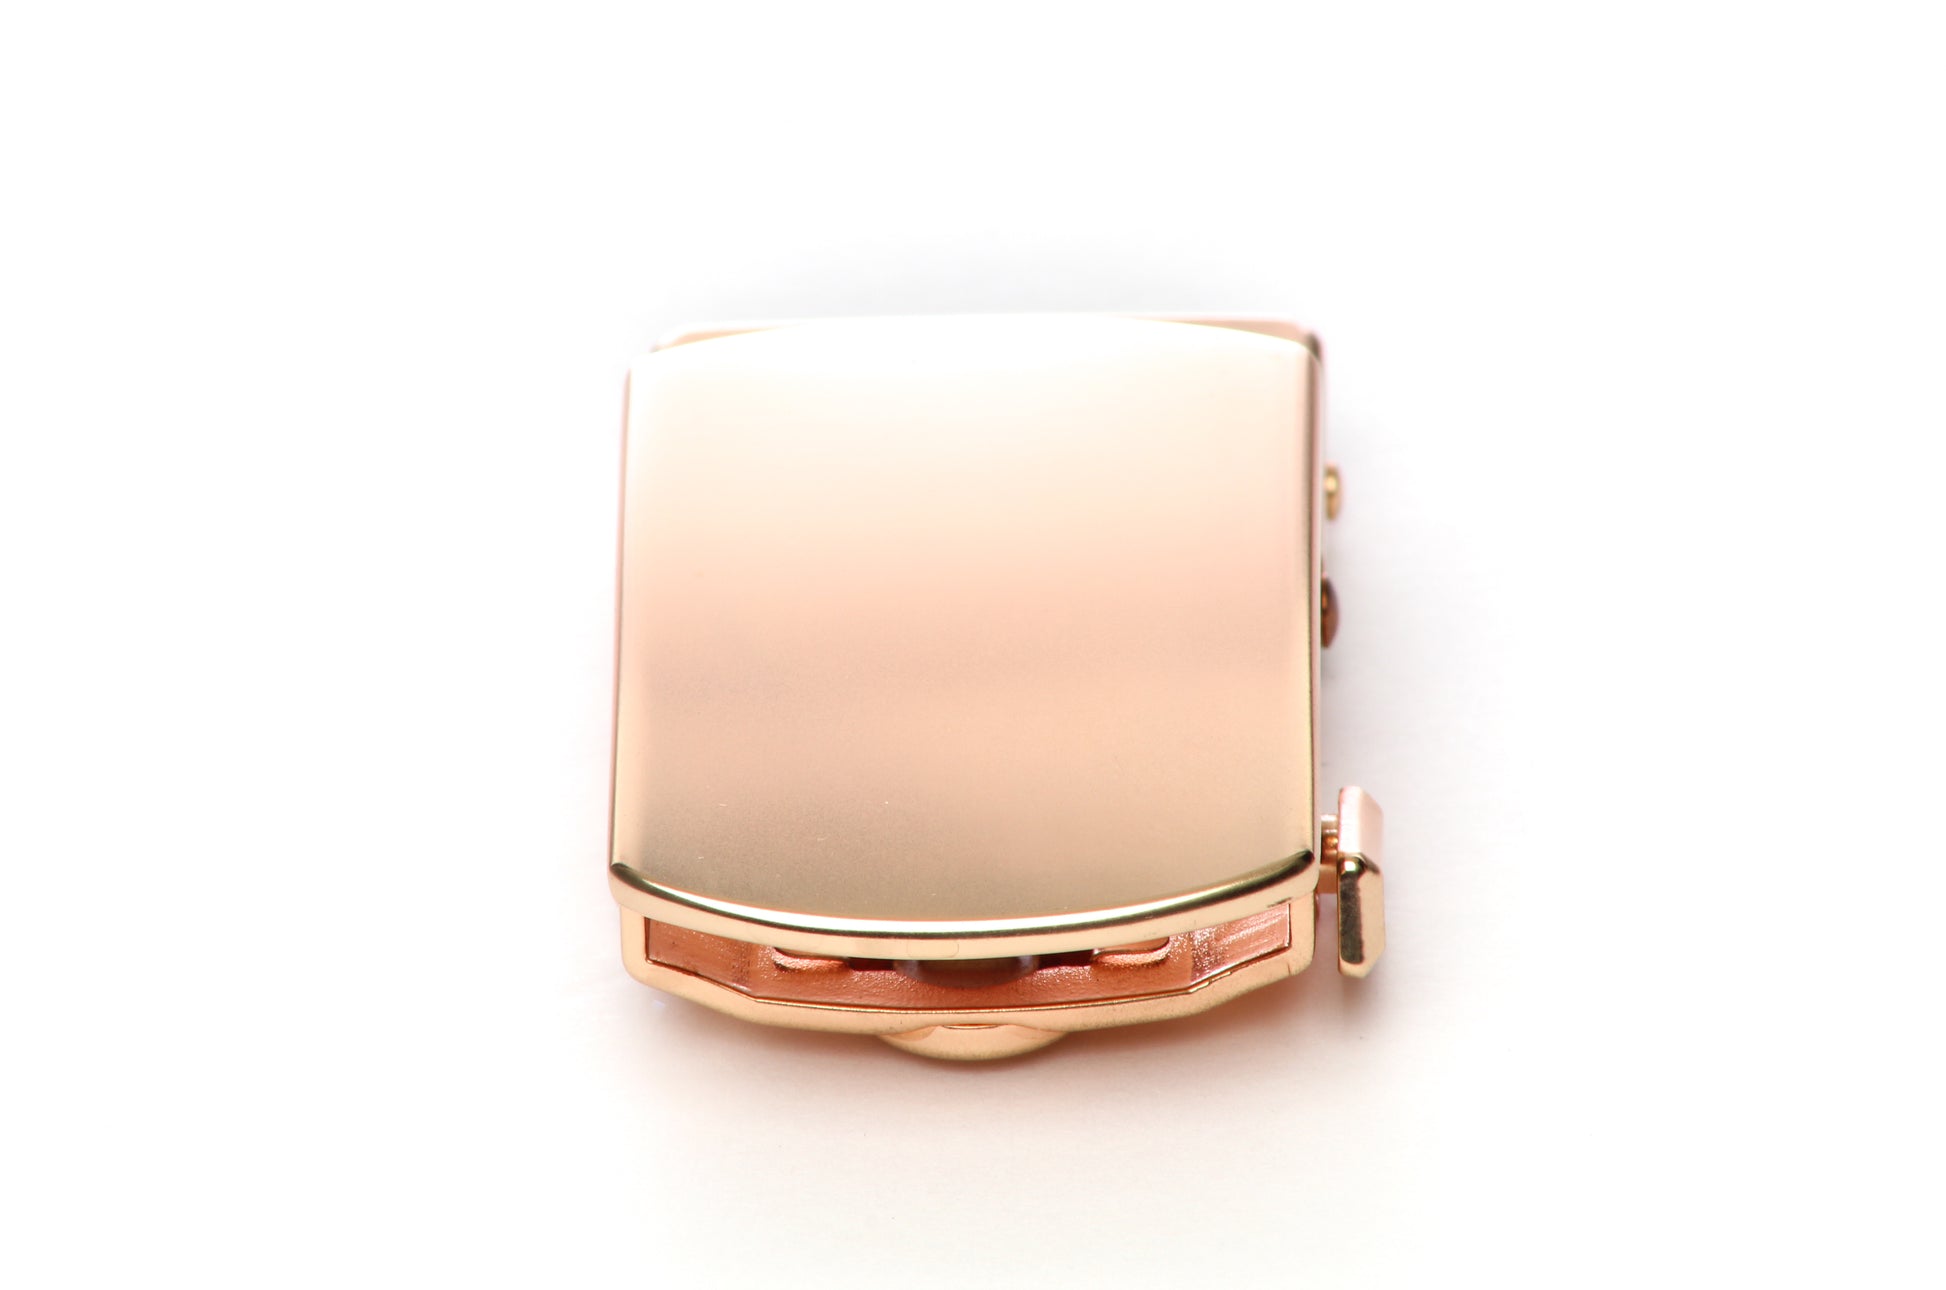 Men's classic with a curve ratchet belt buckle in rose gold with a 1.25-inch width, front view.